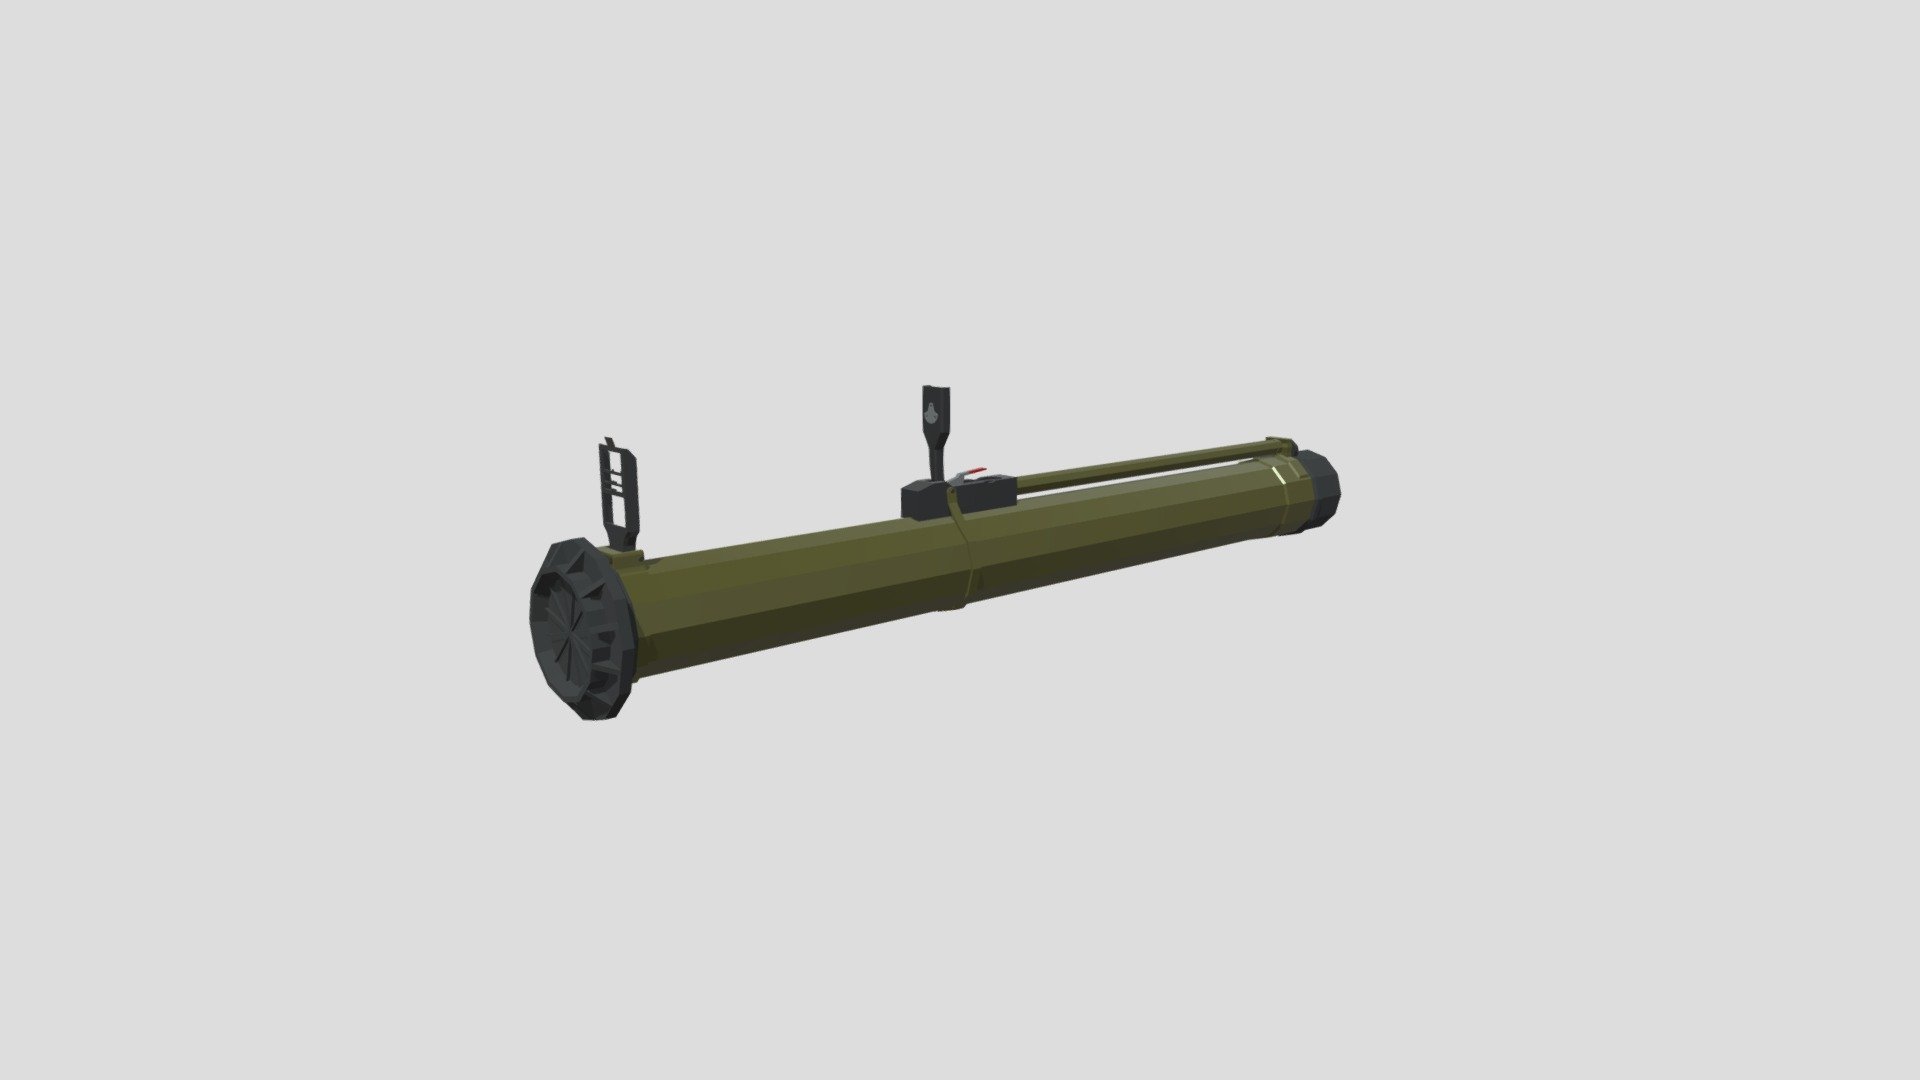 The RPG-26 Aglen is a disposable anti-tank rocket launcher developed by the Soviet Union. It fires a single-stage rocket with jack-knife fins, which unfold after launch. The rocket carries a 72.5 millimetres (2.85 in) diameter high explosive anti-tank single shaped charge warhead capable of penetrating 440 millimetres (17 in) of armour, 1 metre (3 ft 3 in) of reinforced concrete or 1.5 metres (4 ft 11 in) of brickwork. It has a maximum effective range of around 250 metres (820 ft). The similar sized rocket features a slightly heavier and more powerful HEAT warhead and more powerful rocket engine. The limited extension of the RPG-22 launch tube was found of little use. Therefore the RPG-26 has a rigid non-telescoping launch tube 3d model